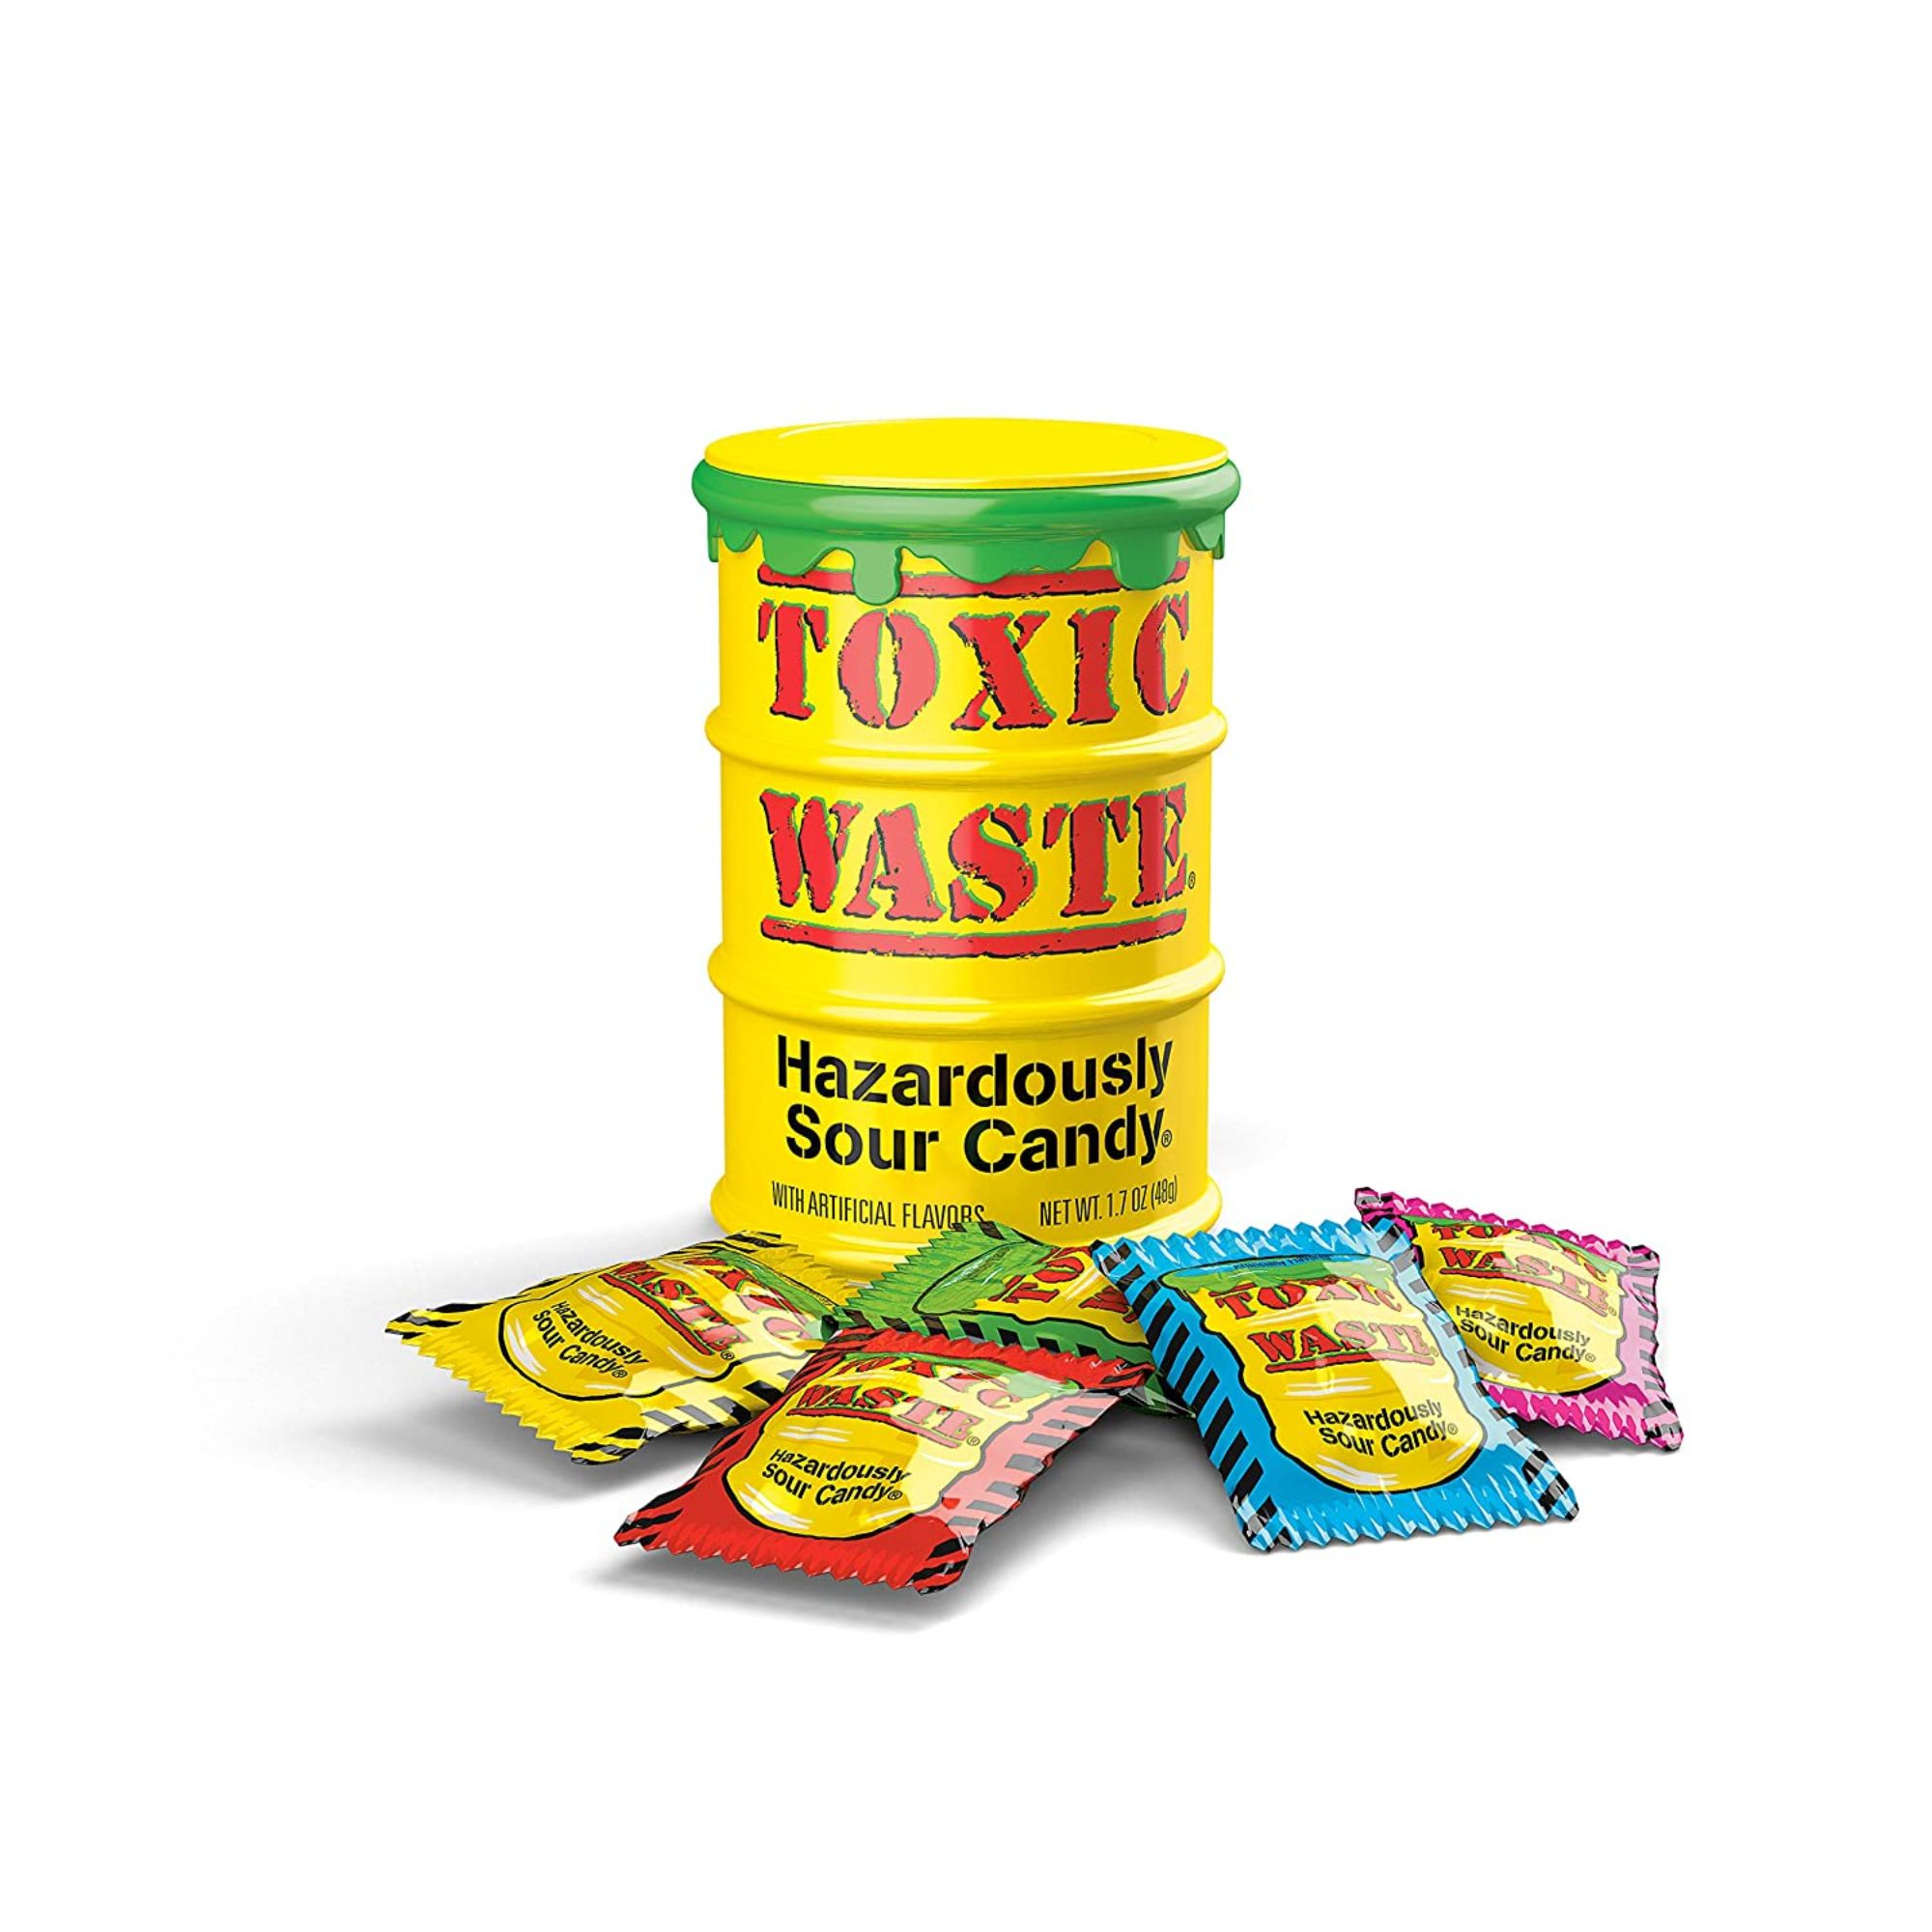 Toxic Waste 1.7 oz Drums Sour Display Sour Candy, 12 Ct - image 2 of 3